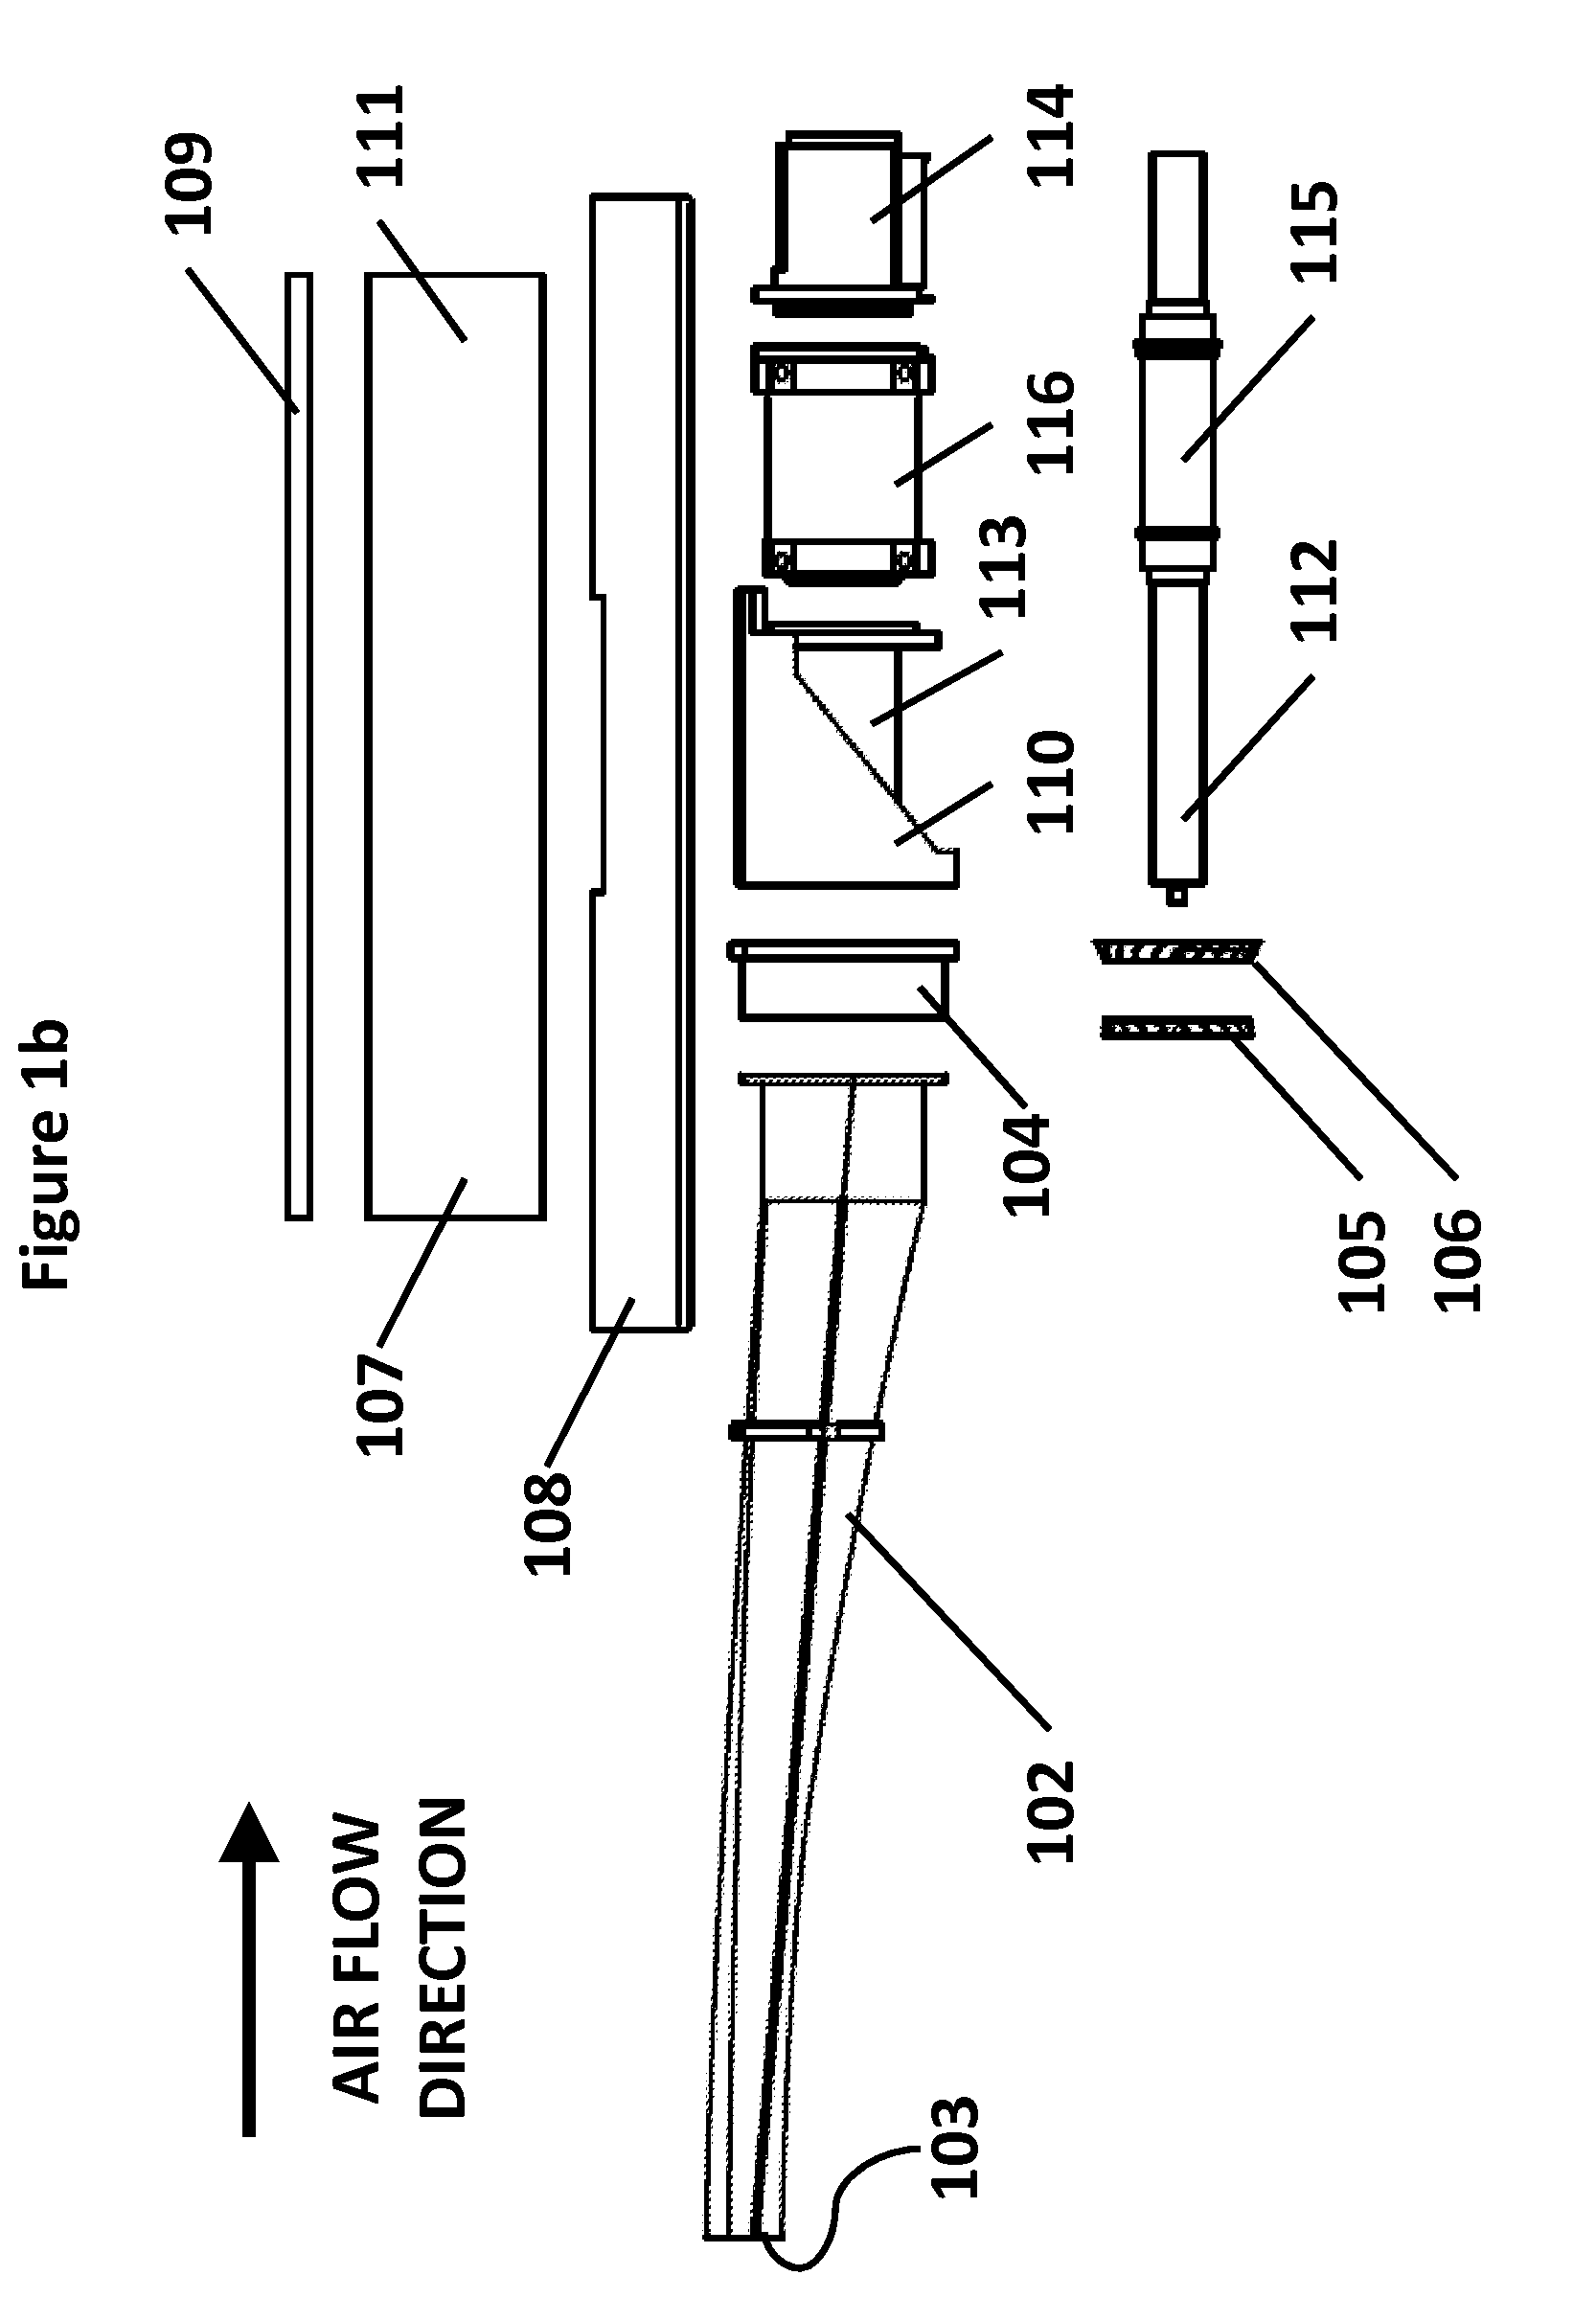 Apparatus and method to increase total-to-static pressure ratio across a turbine